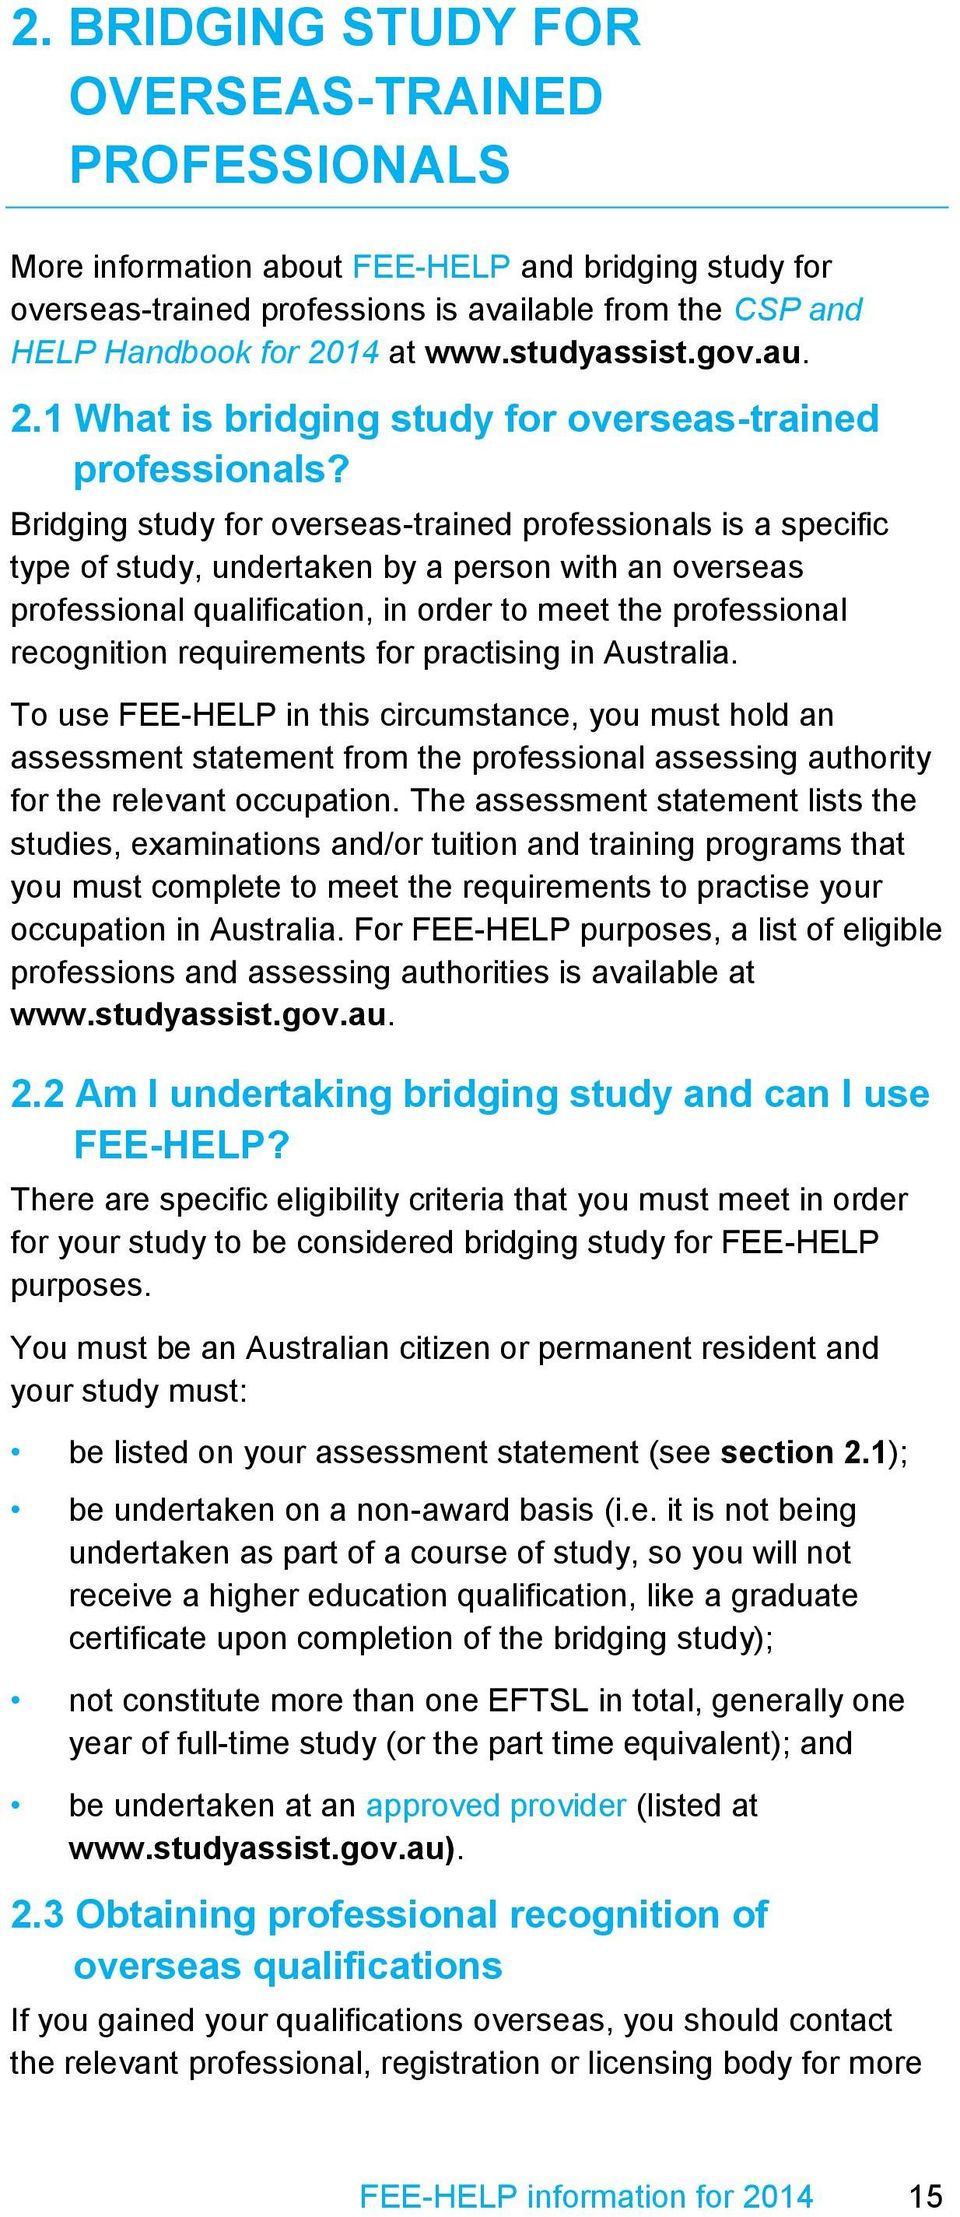 Bridging study for overseas-trained professionals is a specific type of study, undertaken by a person with an overseas professional qualification, in order to meet the professional recognition